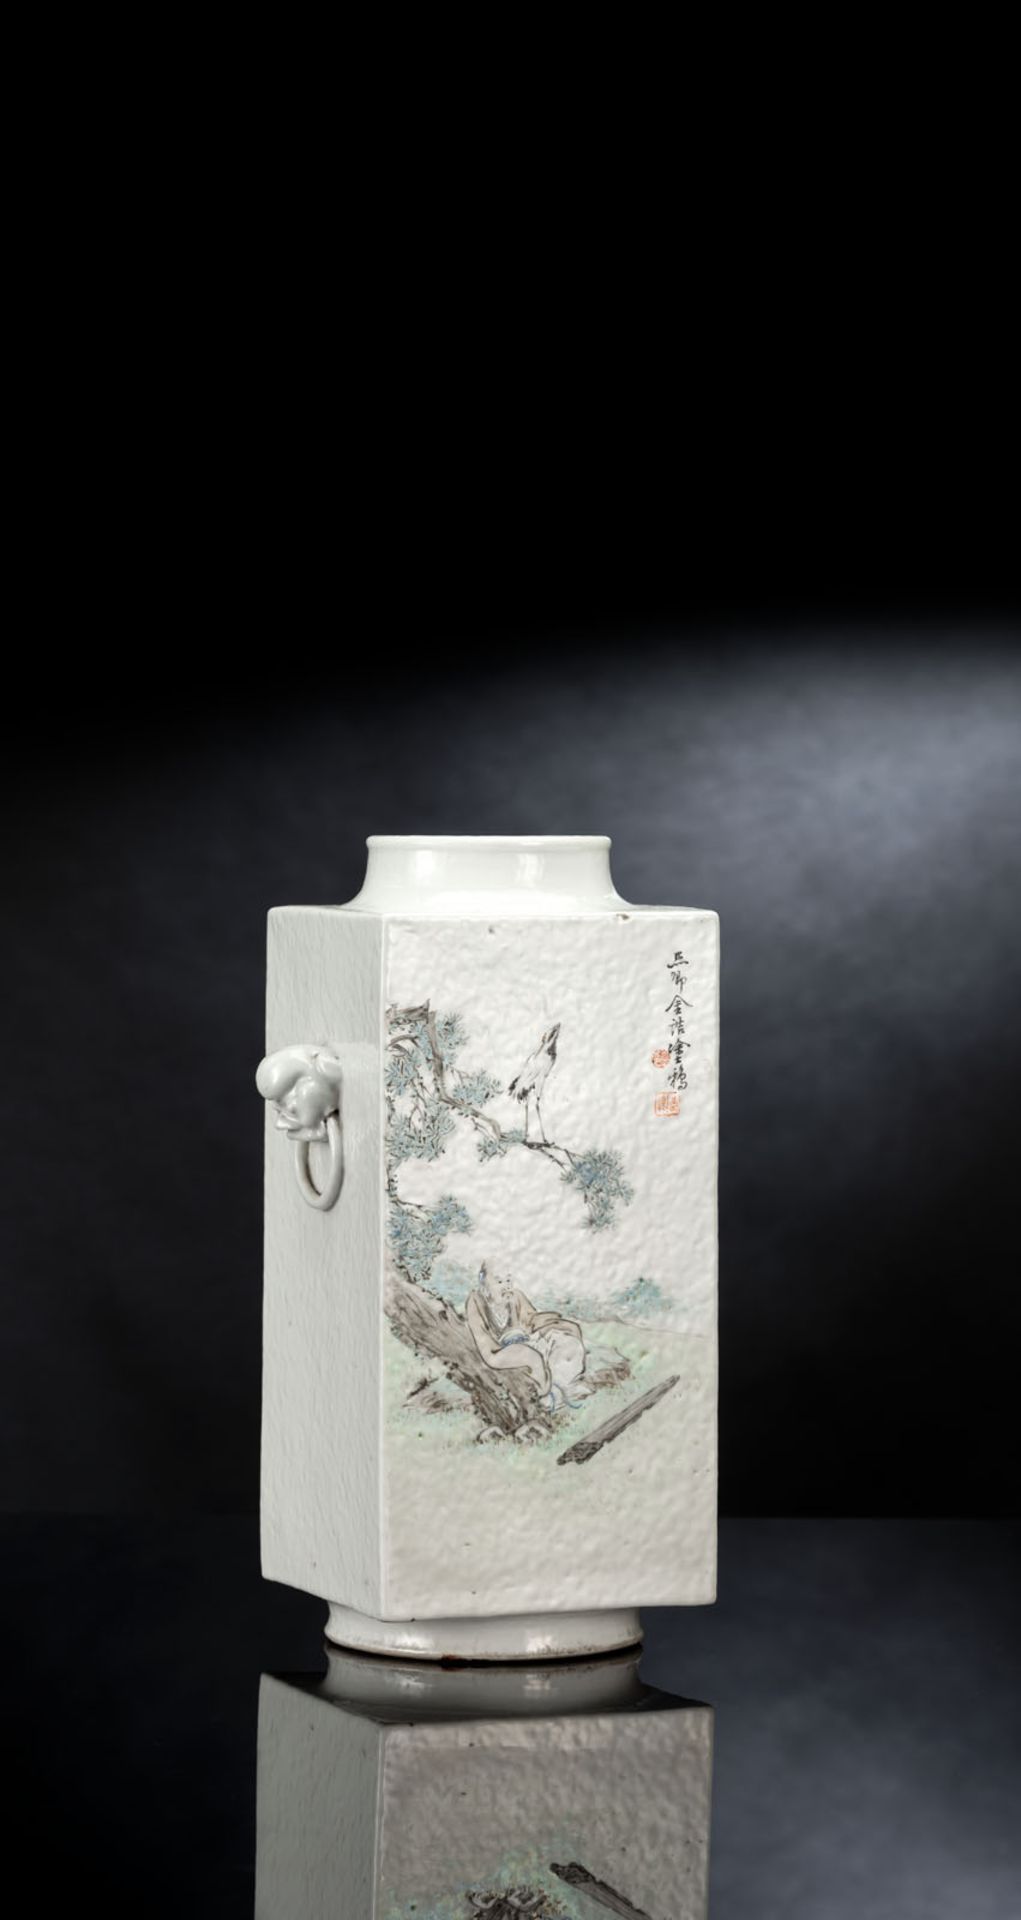 A CONG-SHAPED PORCELAIN VASE WITH A SCENE OF A SCHOLAR AND A LANDSCAPE BY JIN GAO - Image 2 of 2